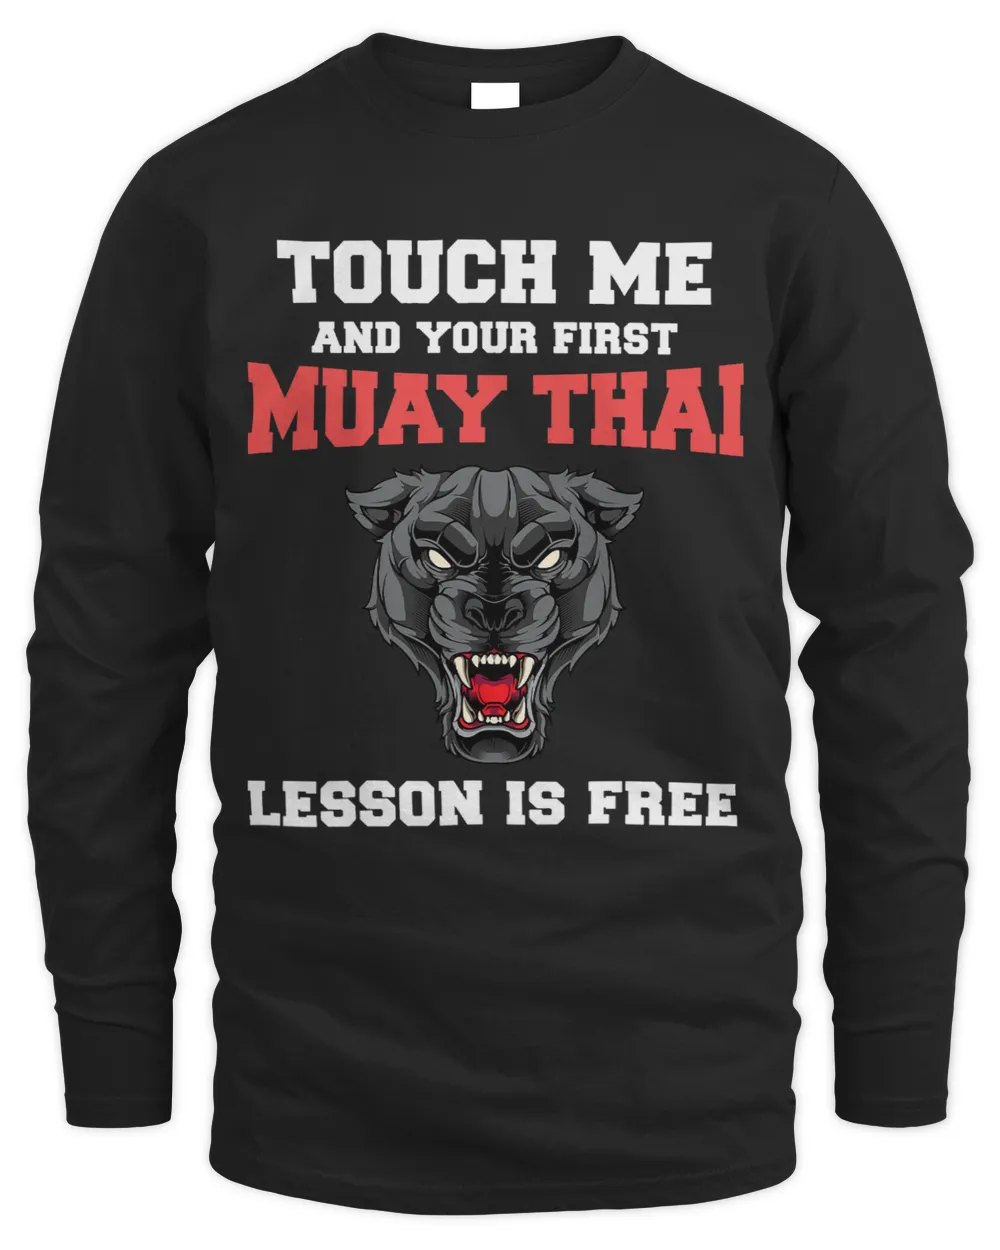 Panther Gift Funny Boxing Muay Thai Lesson Thai Boxing Kickboxing Panther